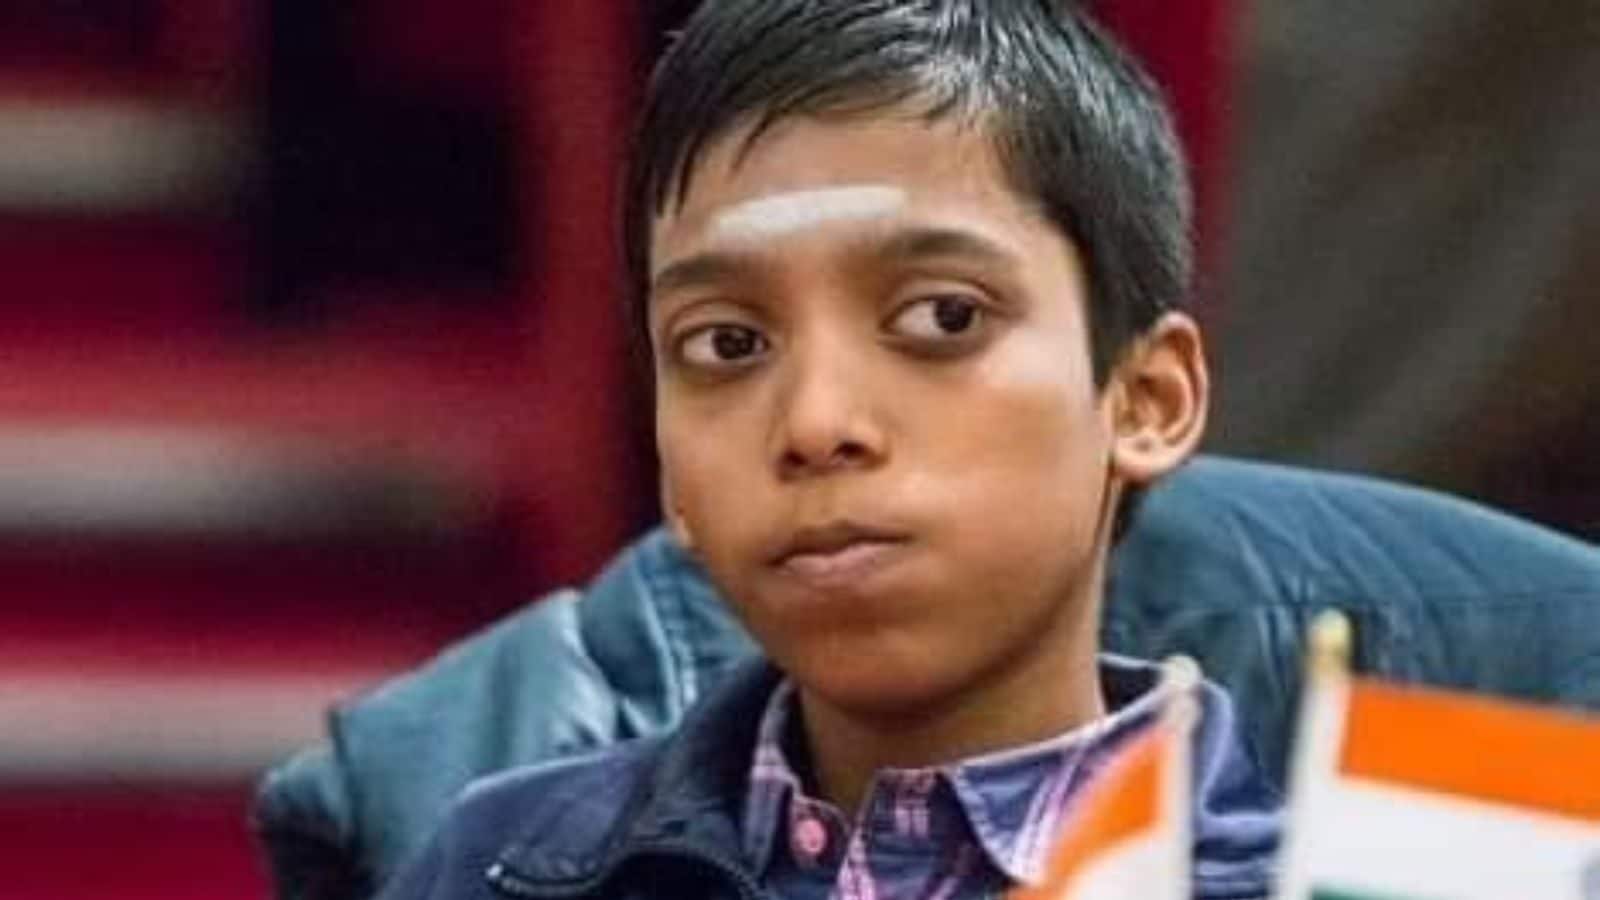 How did Vishy Anand trick 13-year-old Praggnanandhaa?, It's always a  pleasure when the present and future of Indian chess cross swords with each  other. 13-year-old Praggnanandhaa had the black pieces when